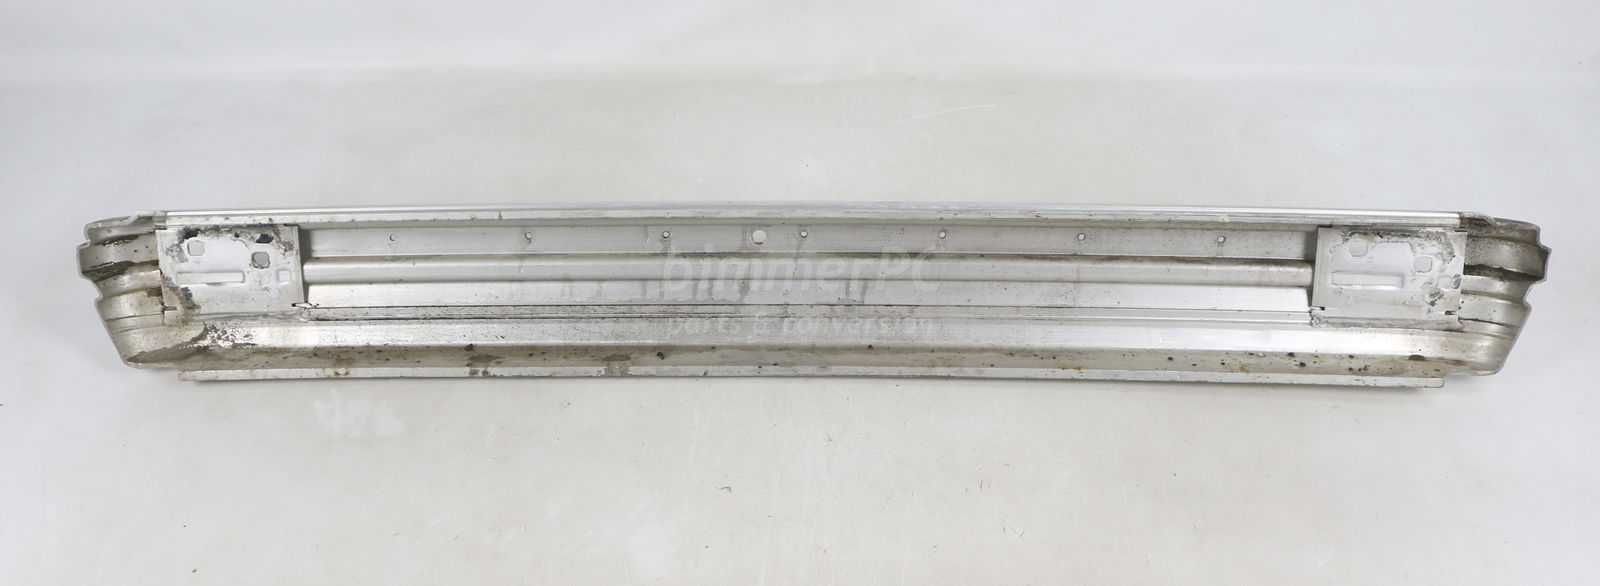 Picture of BMW 51121944183 Rear Bumper Rebar Alloy Core Carrier Reinforcement Support Member E34 for sale